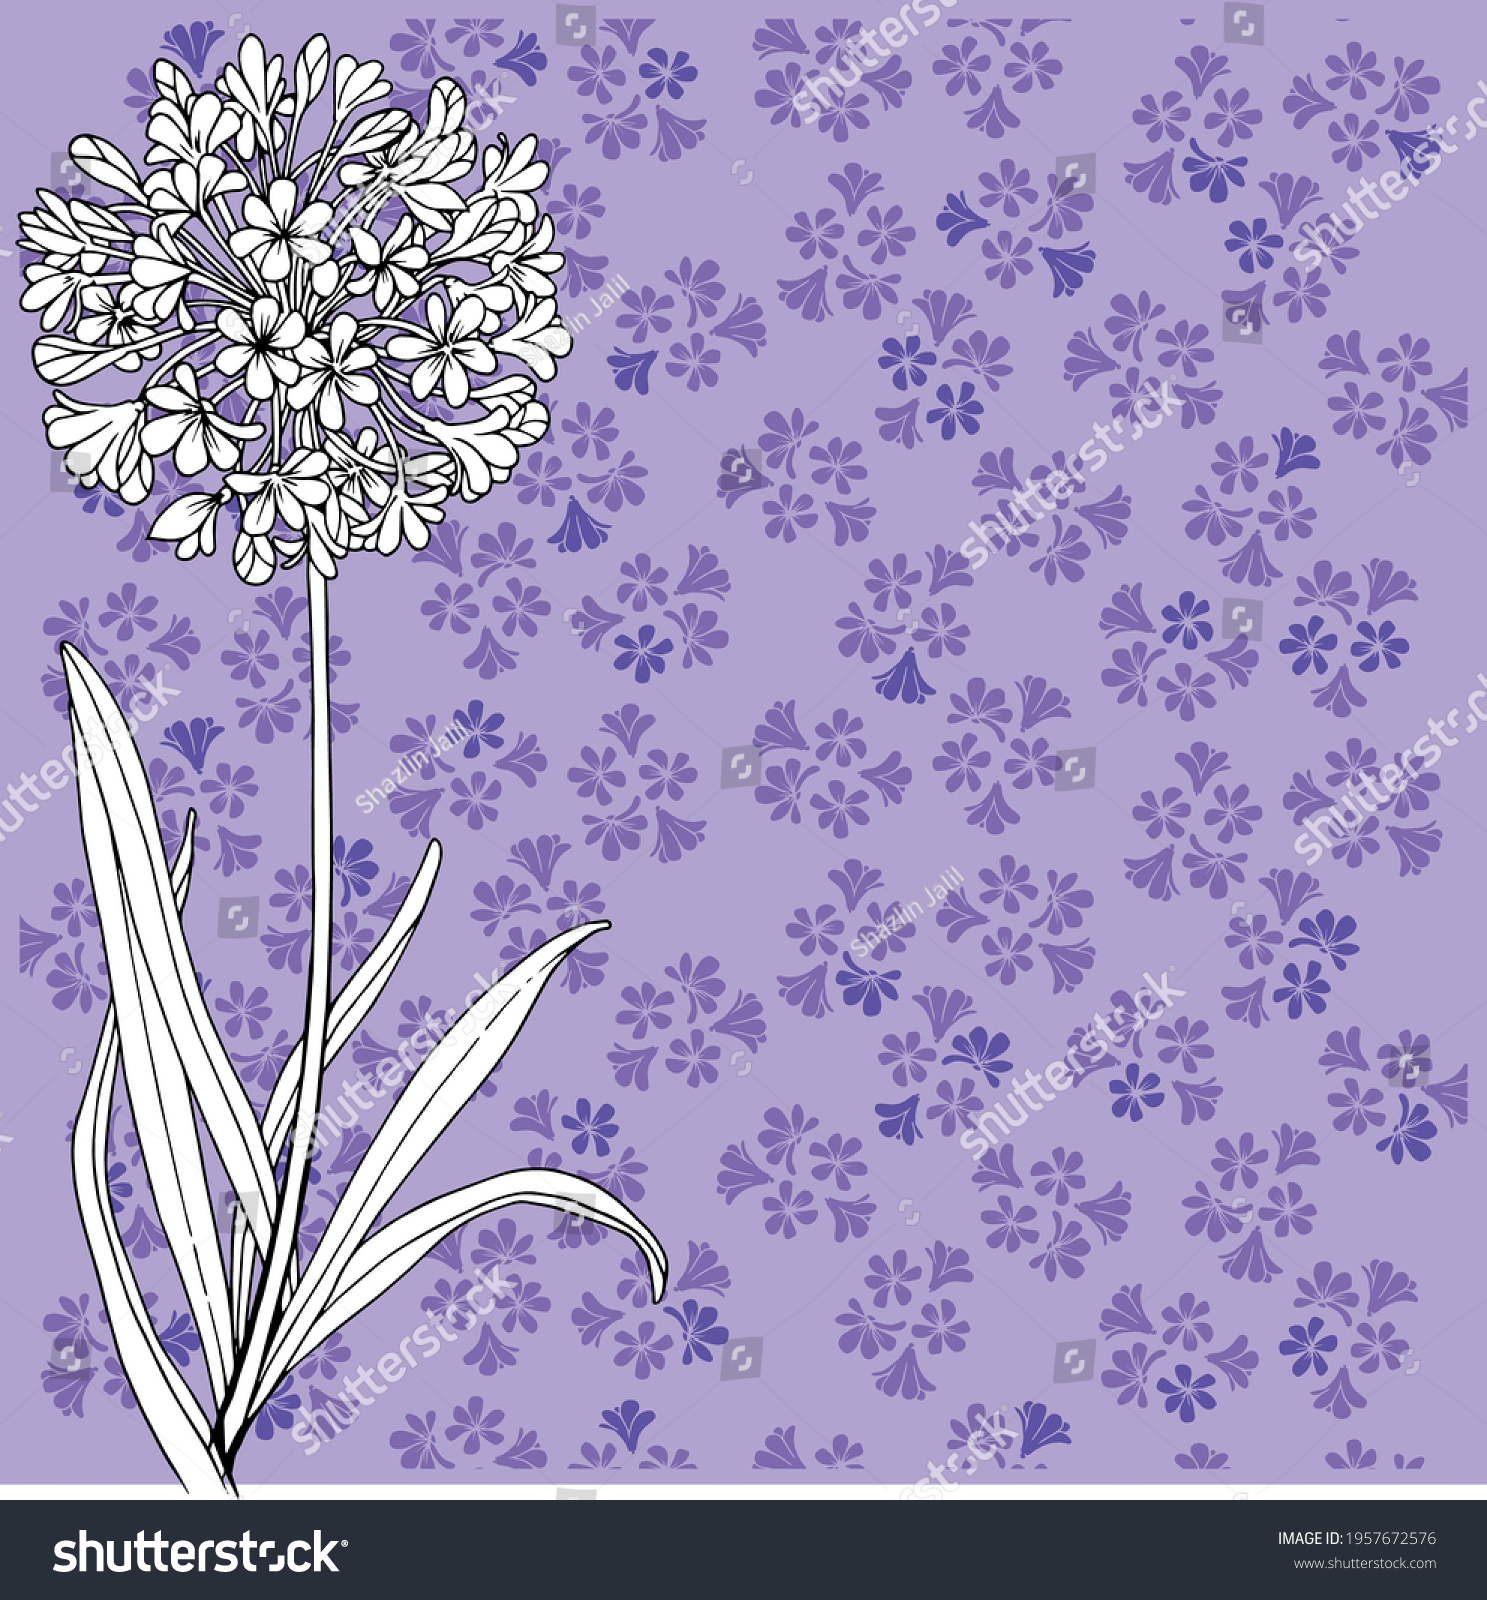 SVG of Agapanthus floral design and seamless pattern. Hand drawn flower vector design elements design for paper, fabric, interior decor, fill, cover, wallpaper, wrapping paper. Vector illustration svg